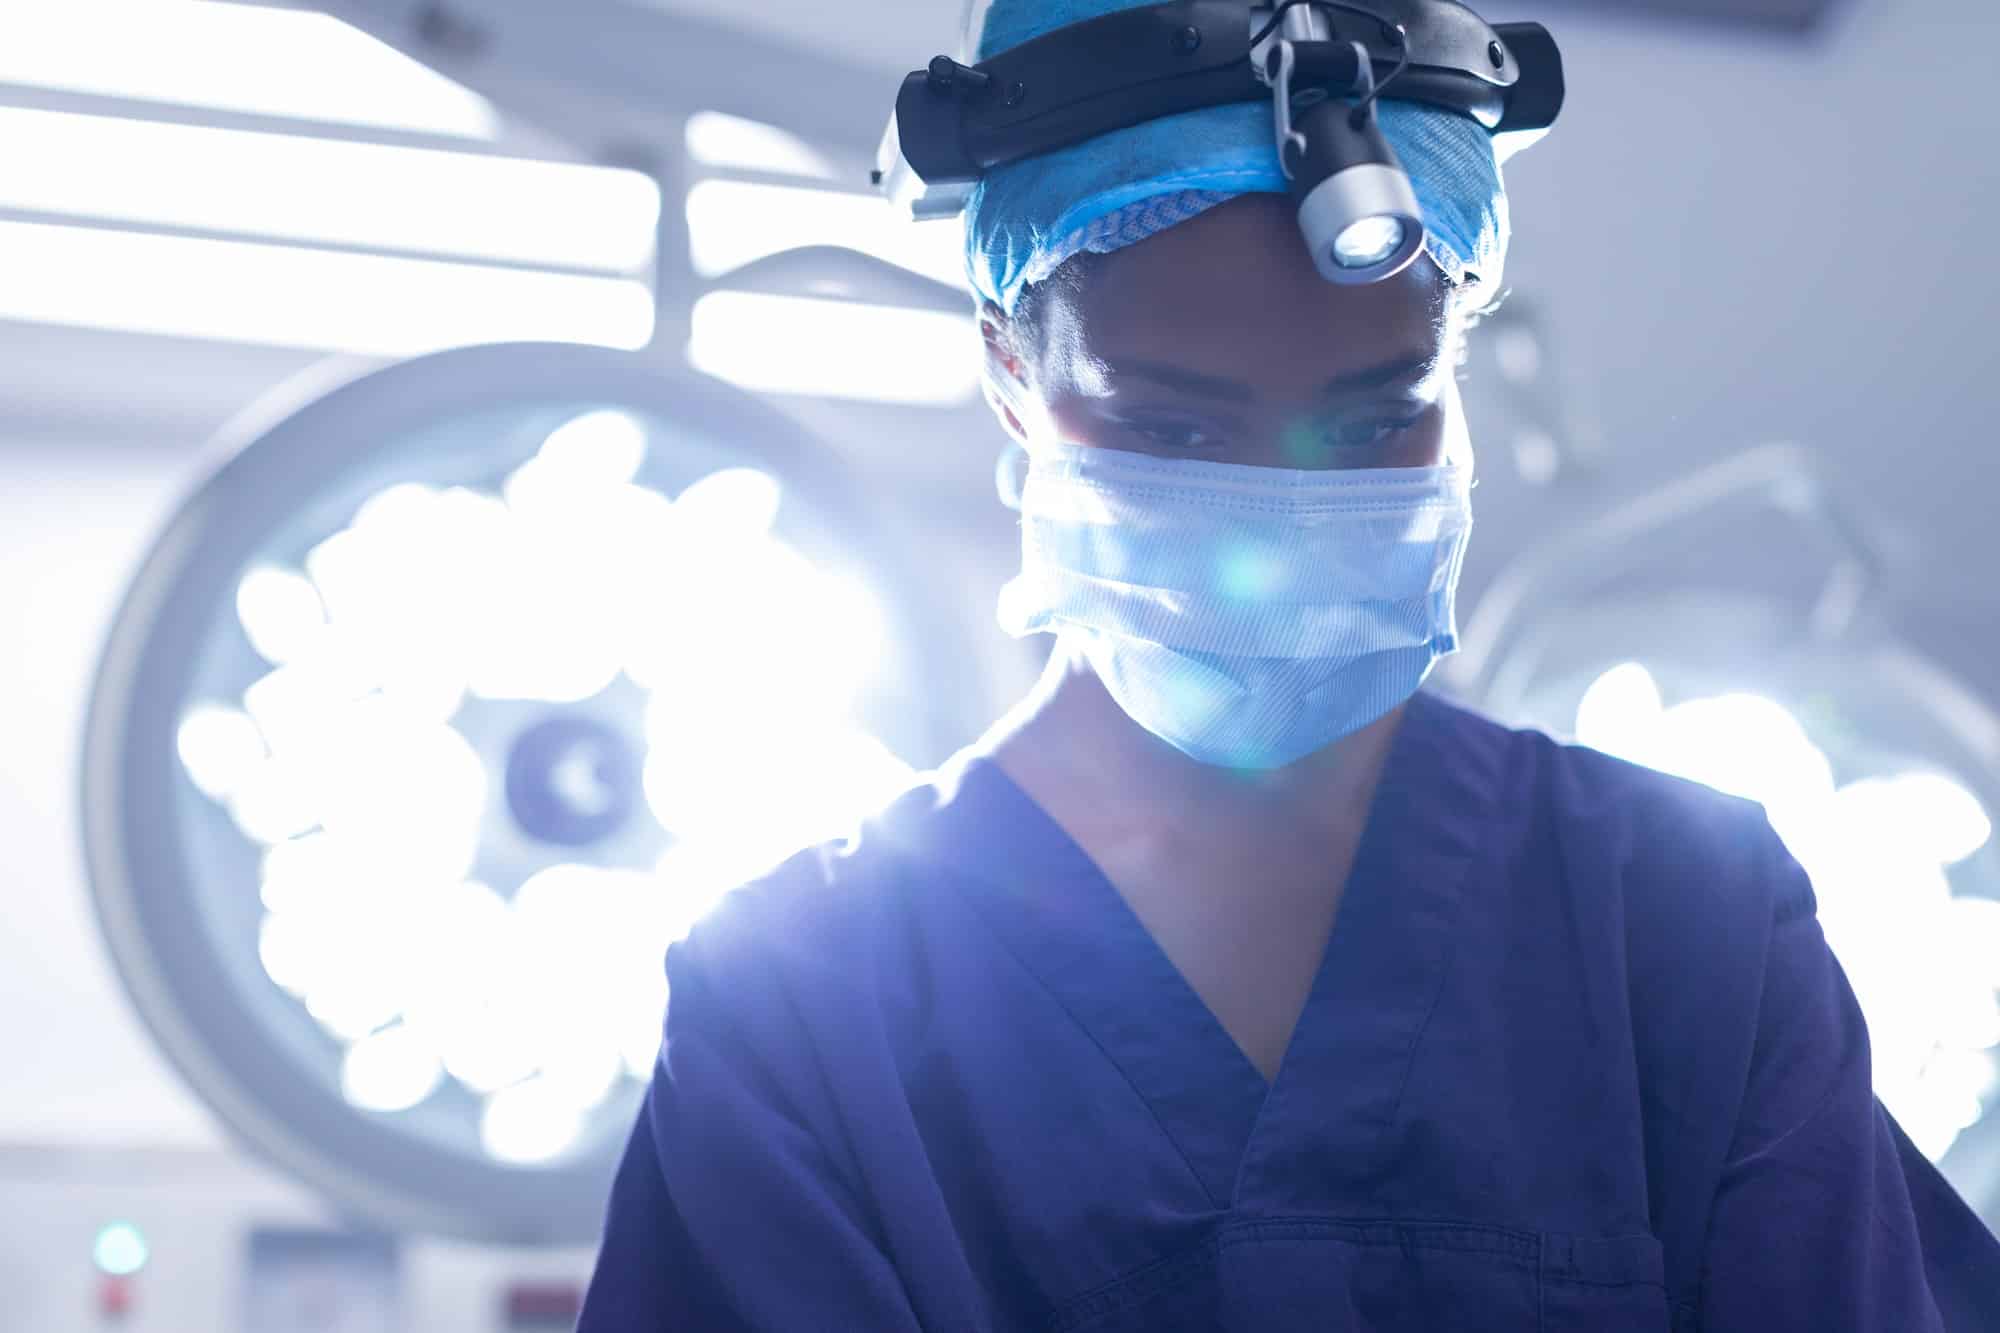 Young Mixed-race female with surgical headlight performing operation in operation theater